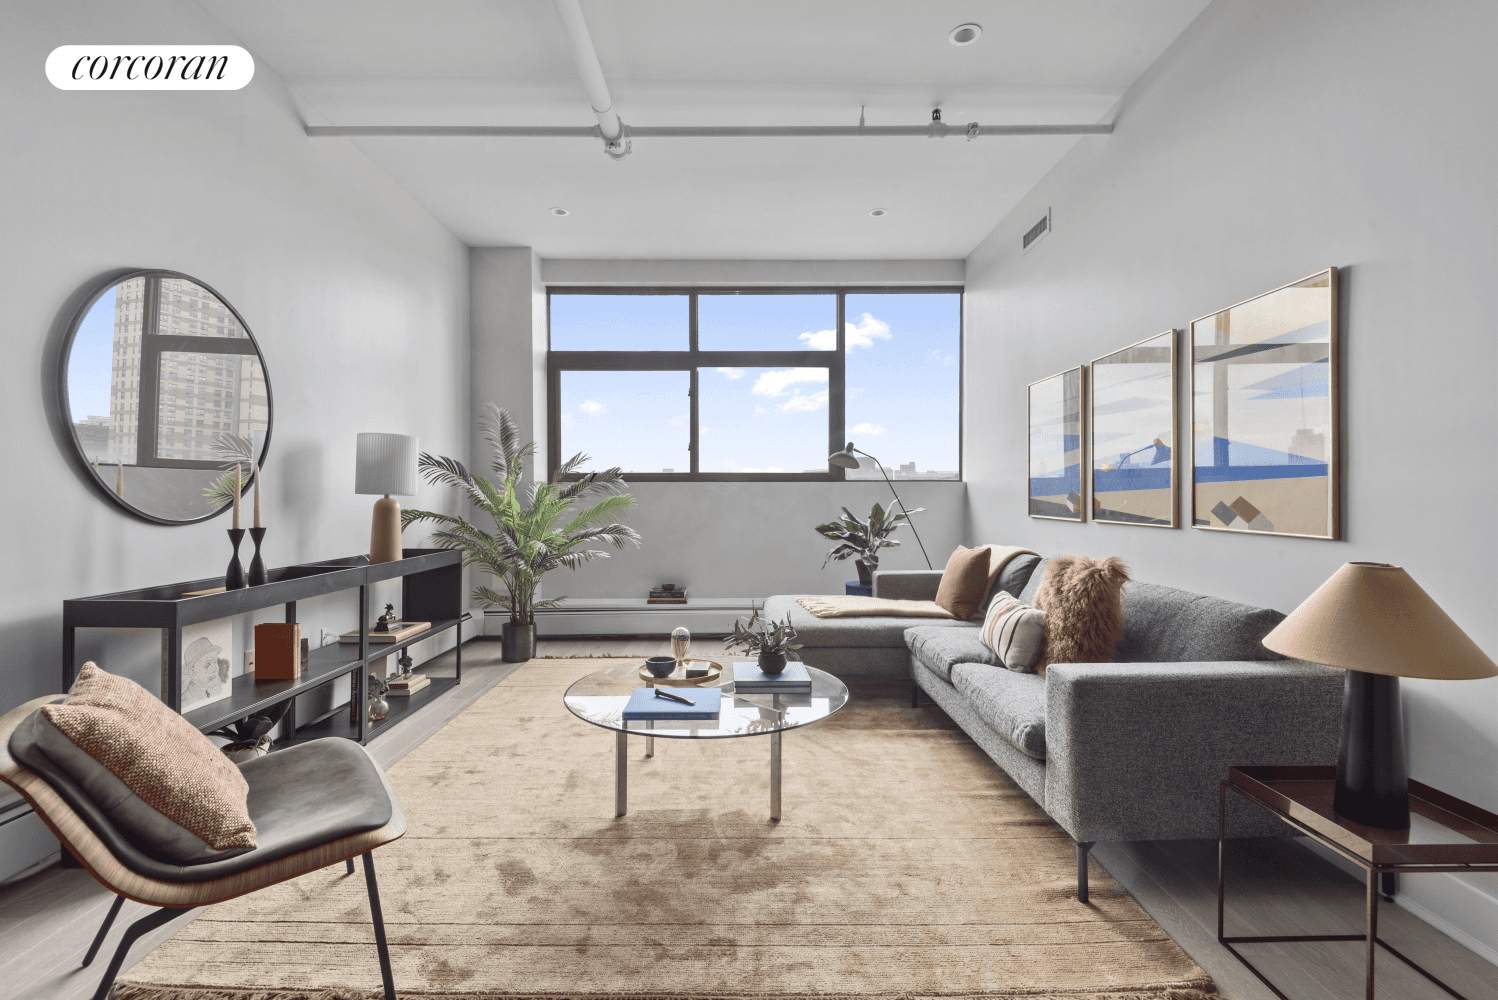 Introducing Residence 808 at the Iconic Newswalk BuildingDiscover the epitome of modern loft living in Residence 808, perched high within the esteemed Newswalk Building.